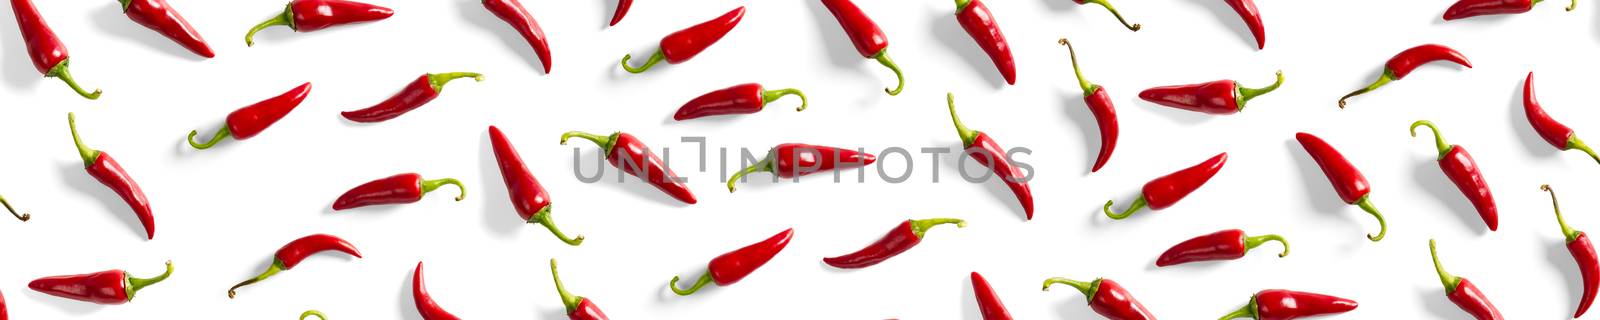 Creative background made of red chili or chilli on white backdrop. Minimal food backgroud. Red hot chilli peppers background, not pattern